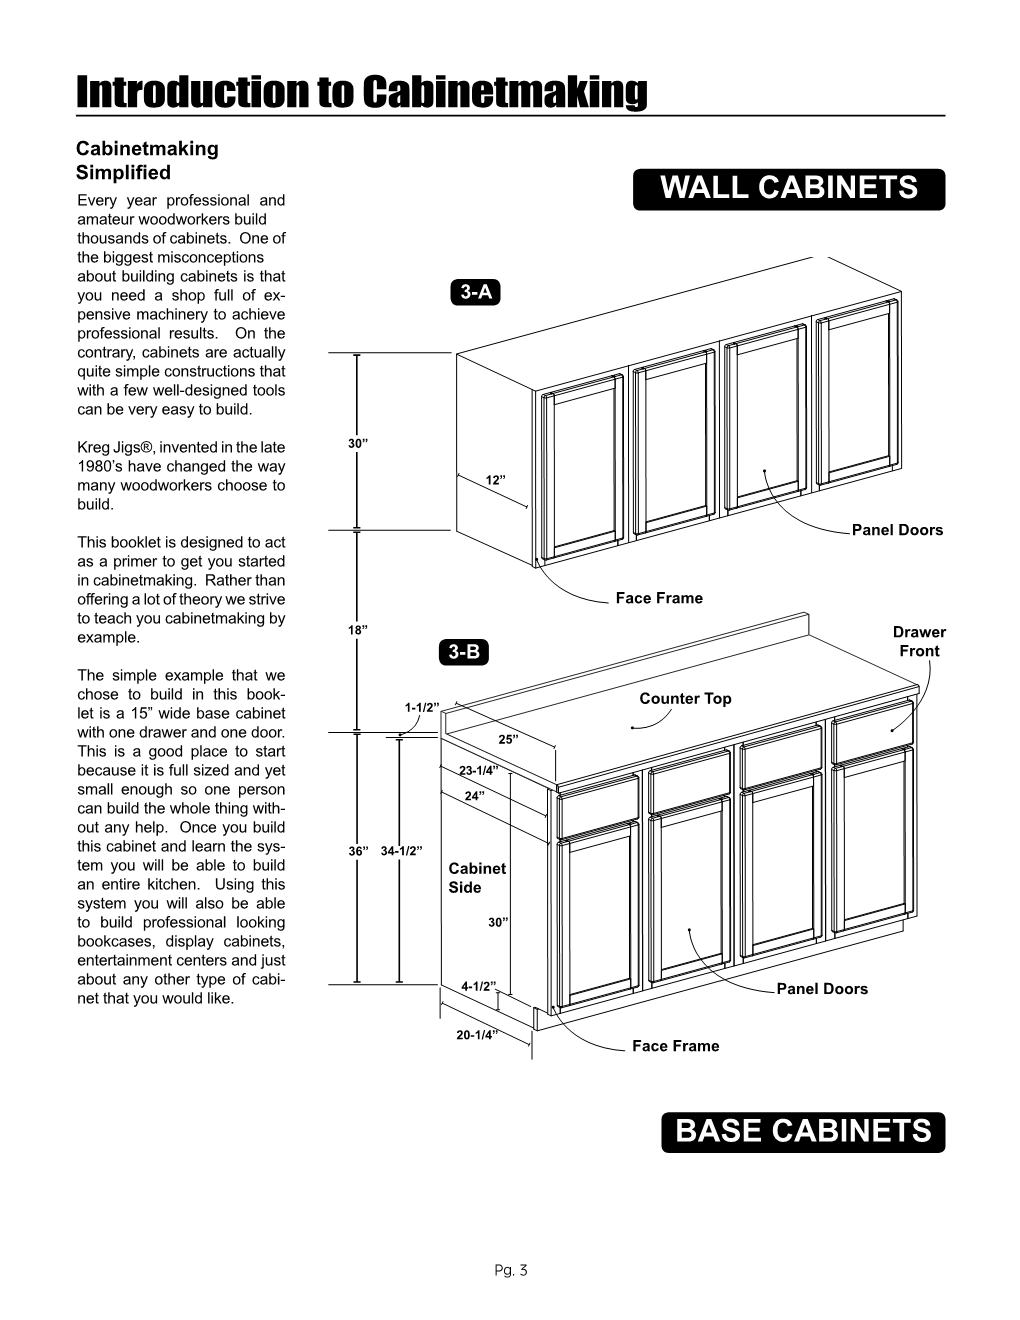 Cabinetmaking Simplified Every Year Professional and WALL CABINETS Amateur Woodworkers Build Thousands of Cabinets